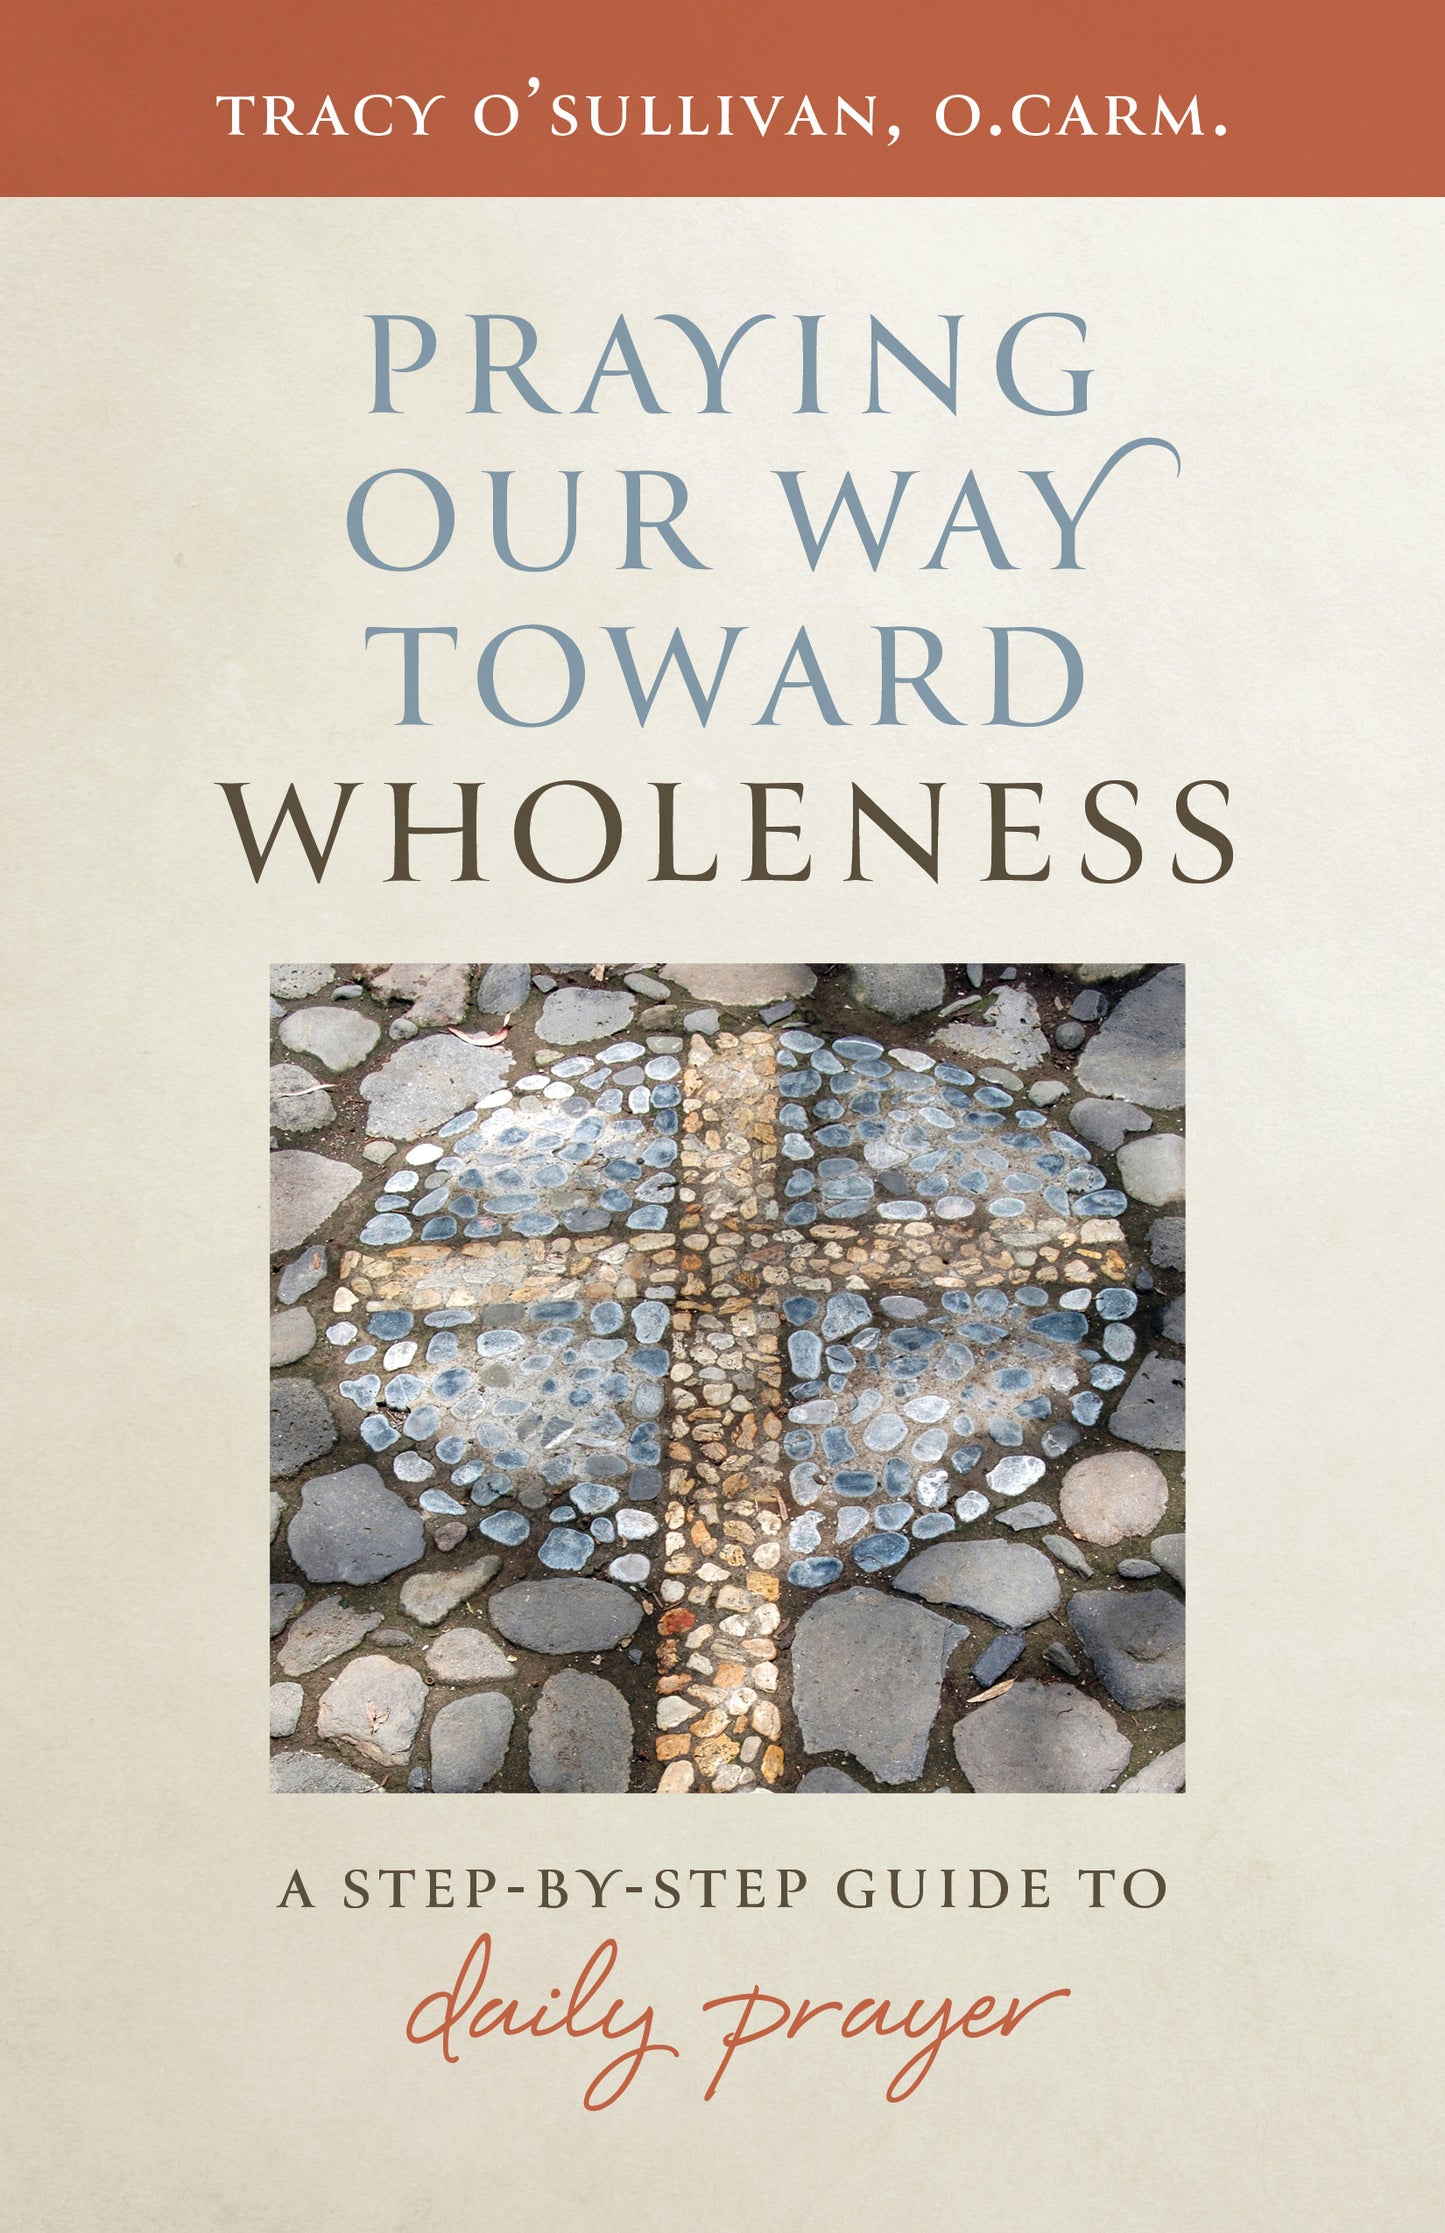 SALE - Praying Our Way Toward Wholeness